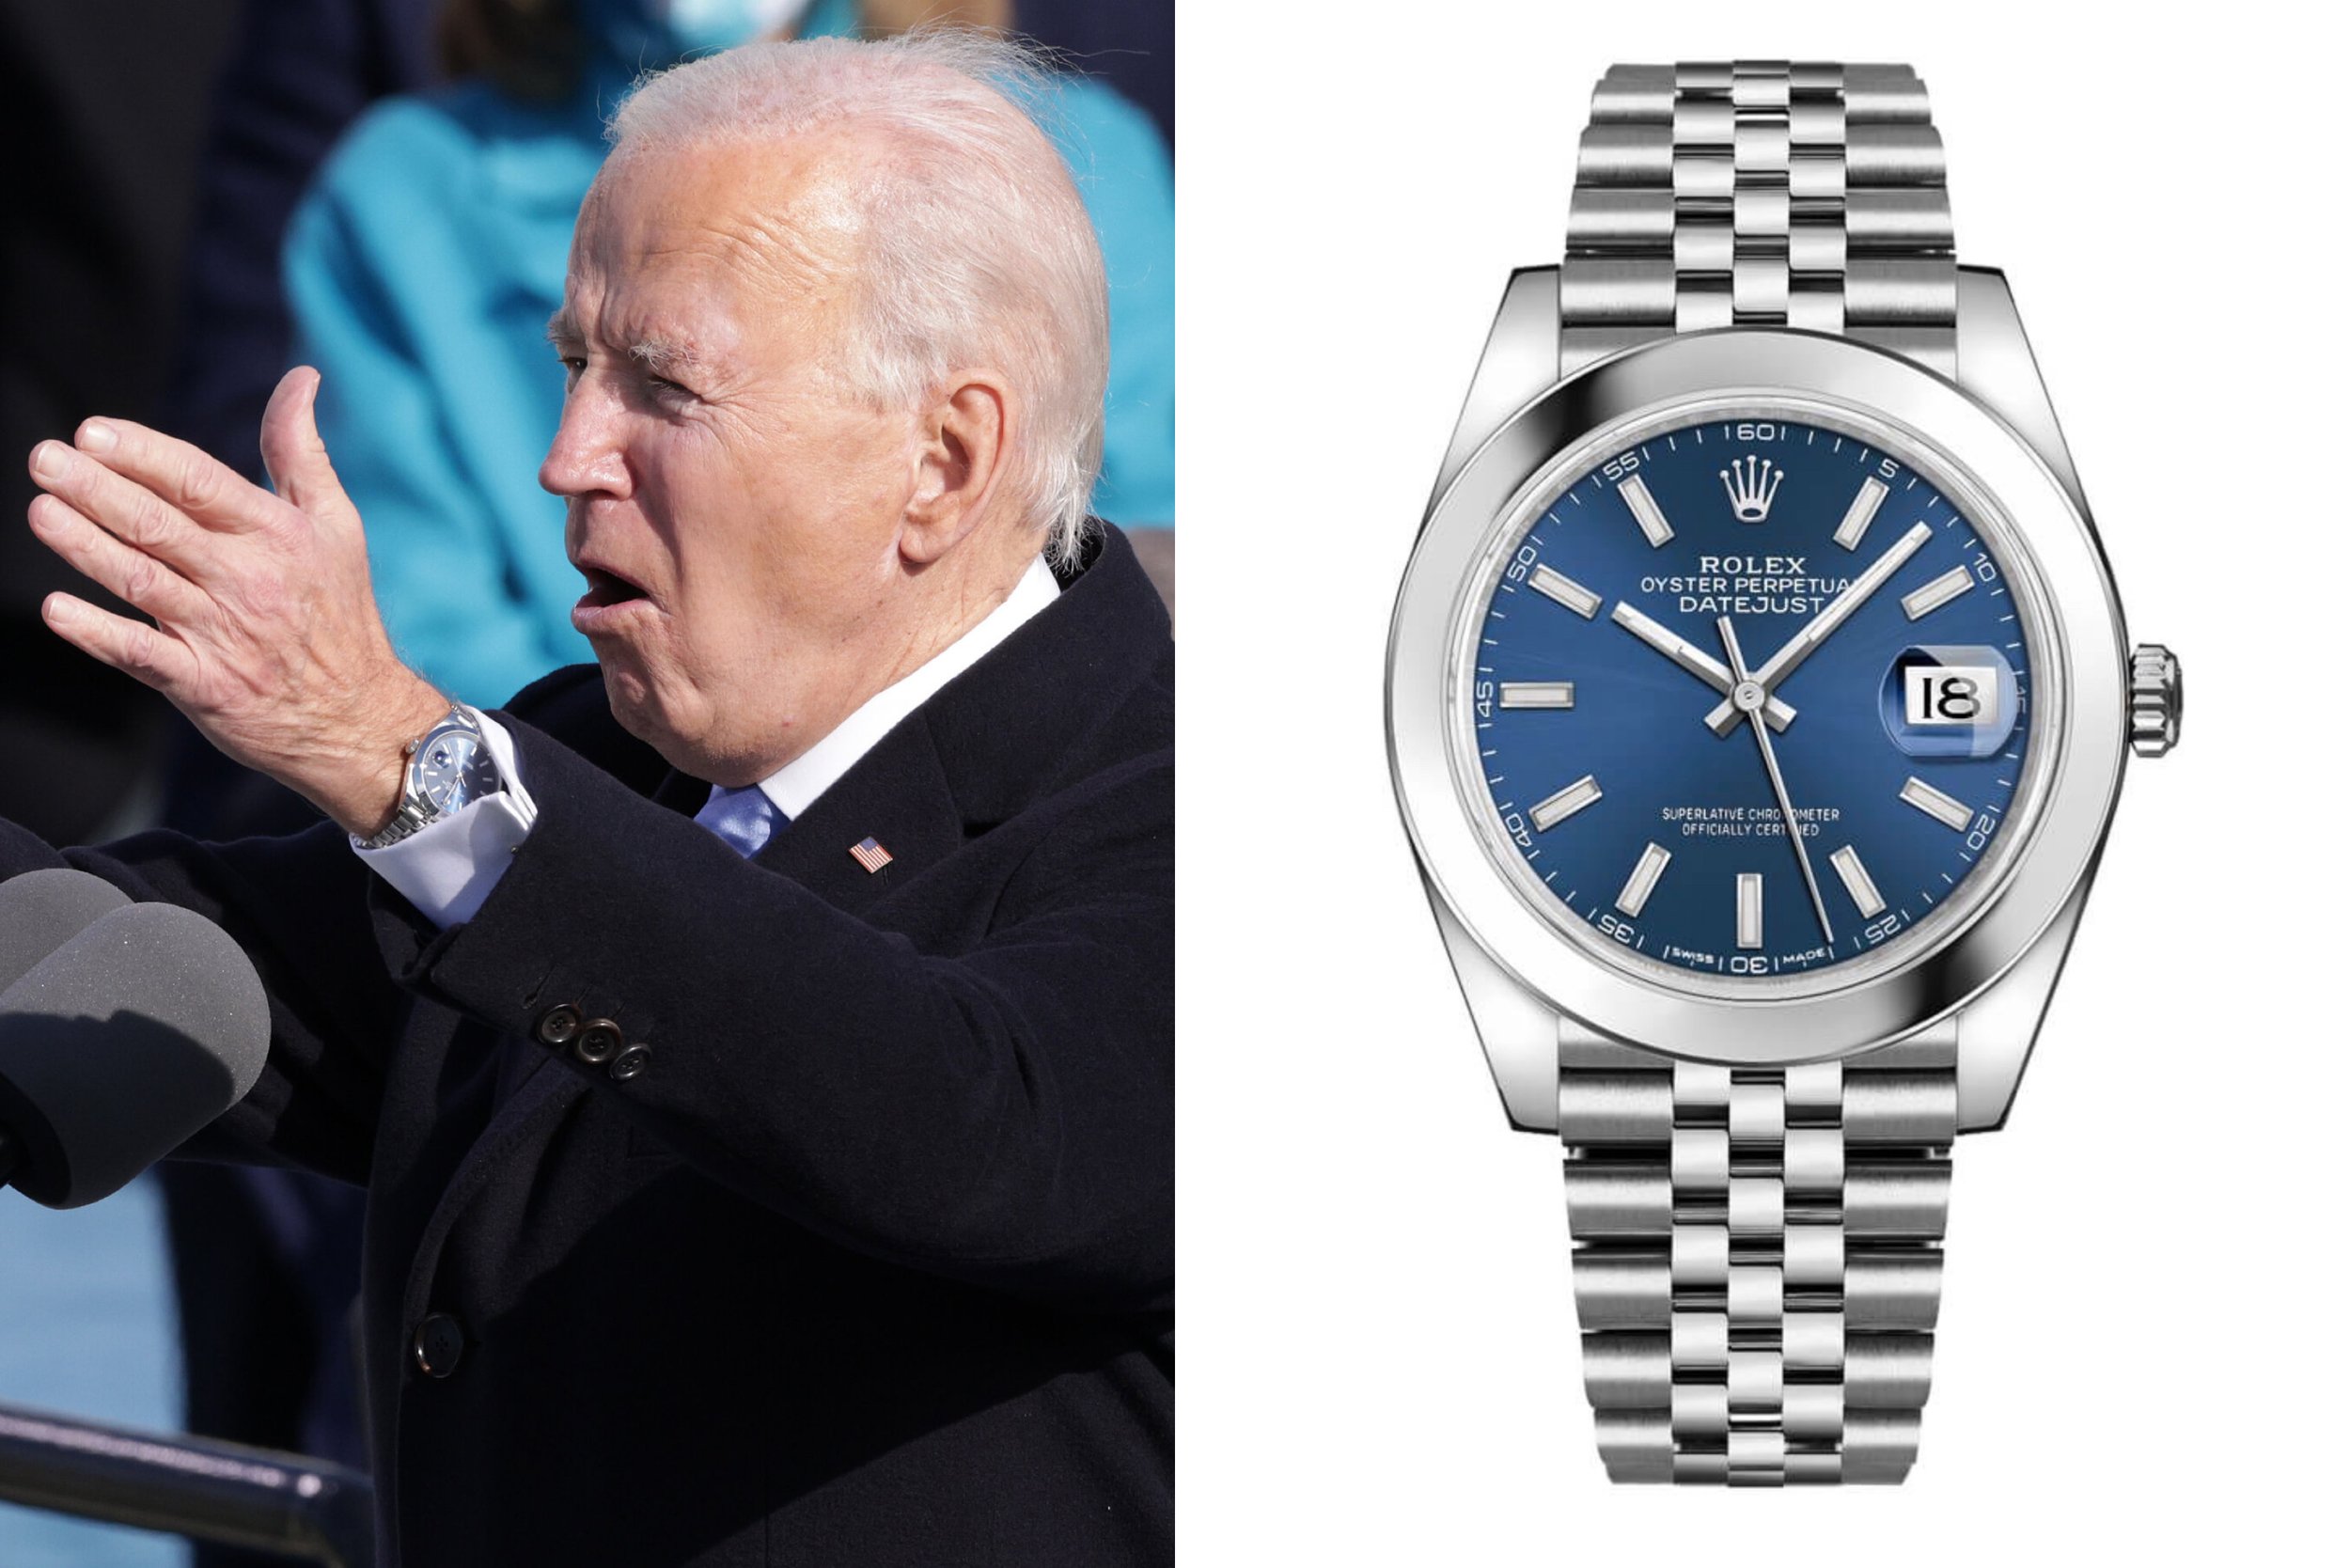 Celebrities And Their Vintage Watch Collections - Who Has The Best Taste? -  Ashton-Blakey Vintage Watches